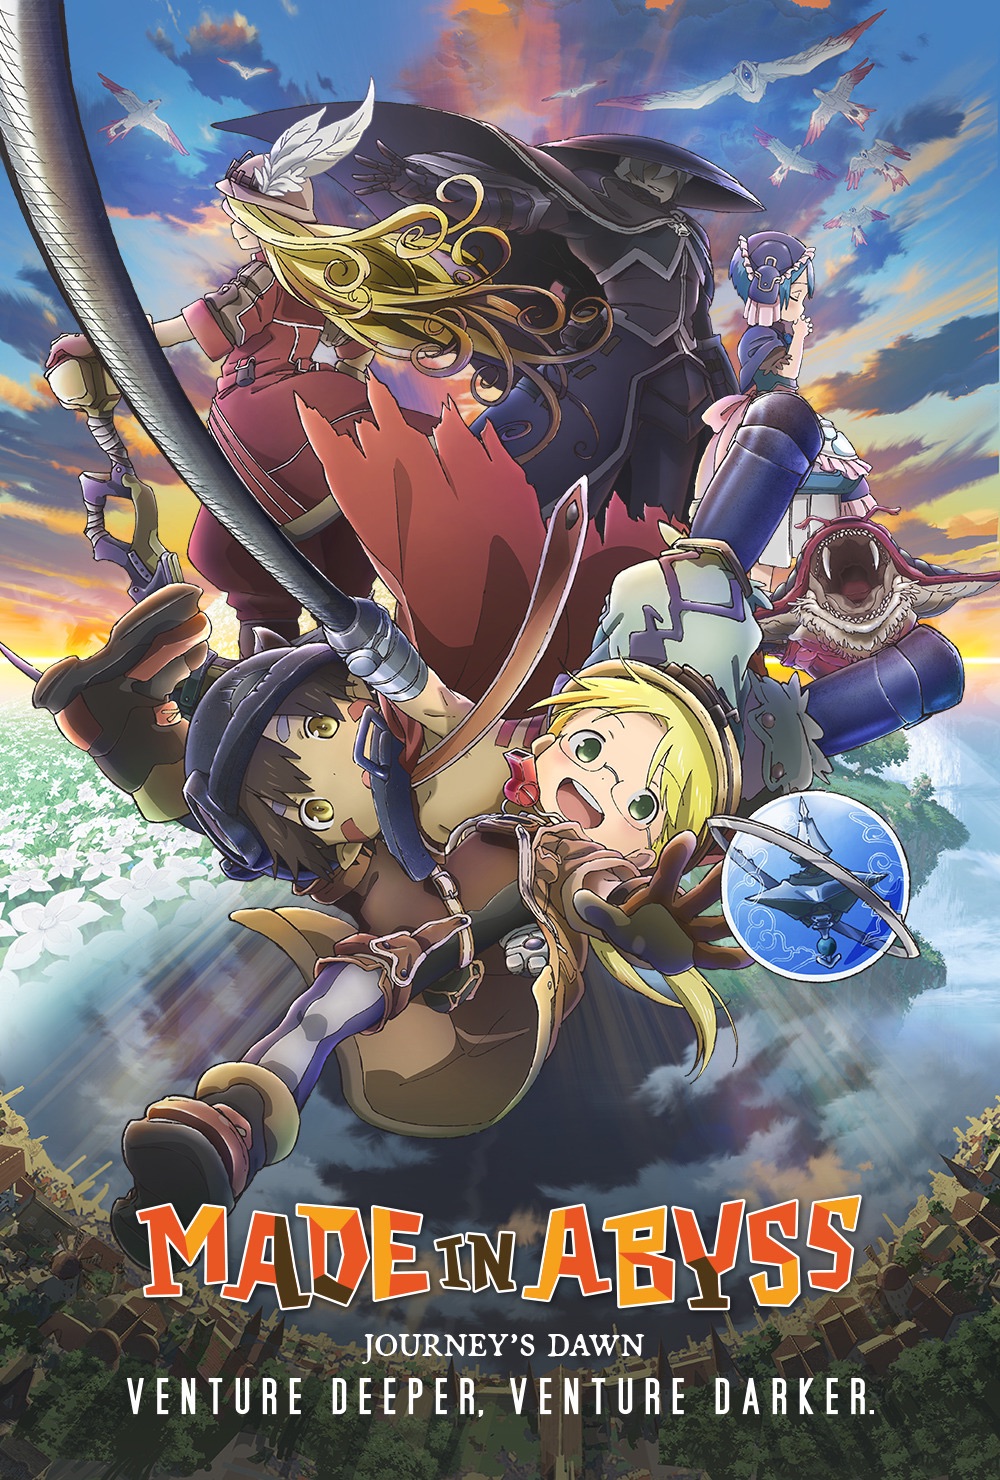 Made in Abyss Series